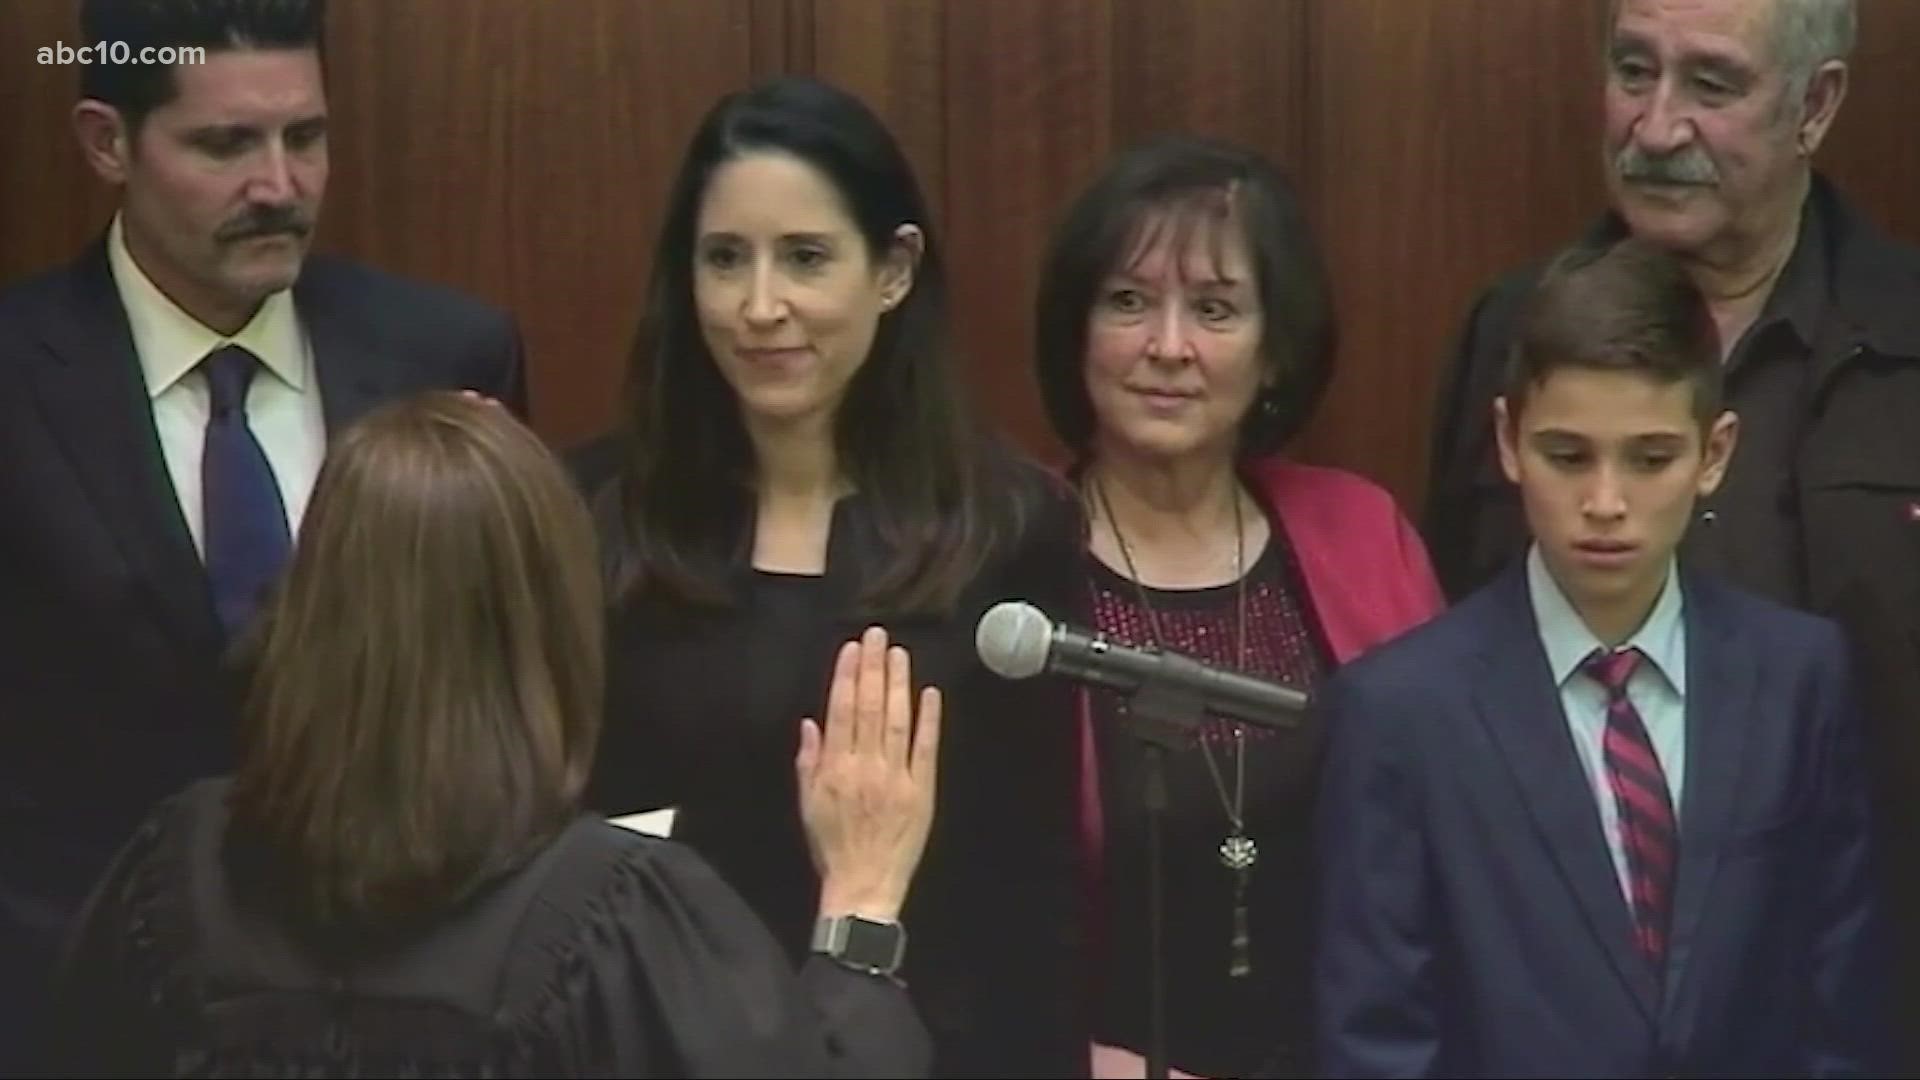 From the fields of Imperial County to the highest court in California, Justice Patricia Guerrero says she is living proof that hard work does pay off in the end.